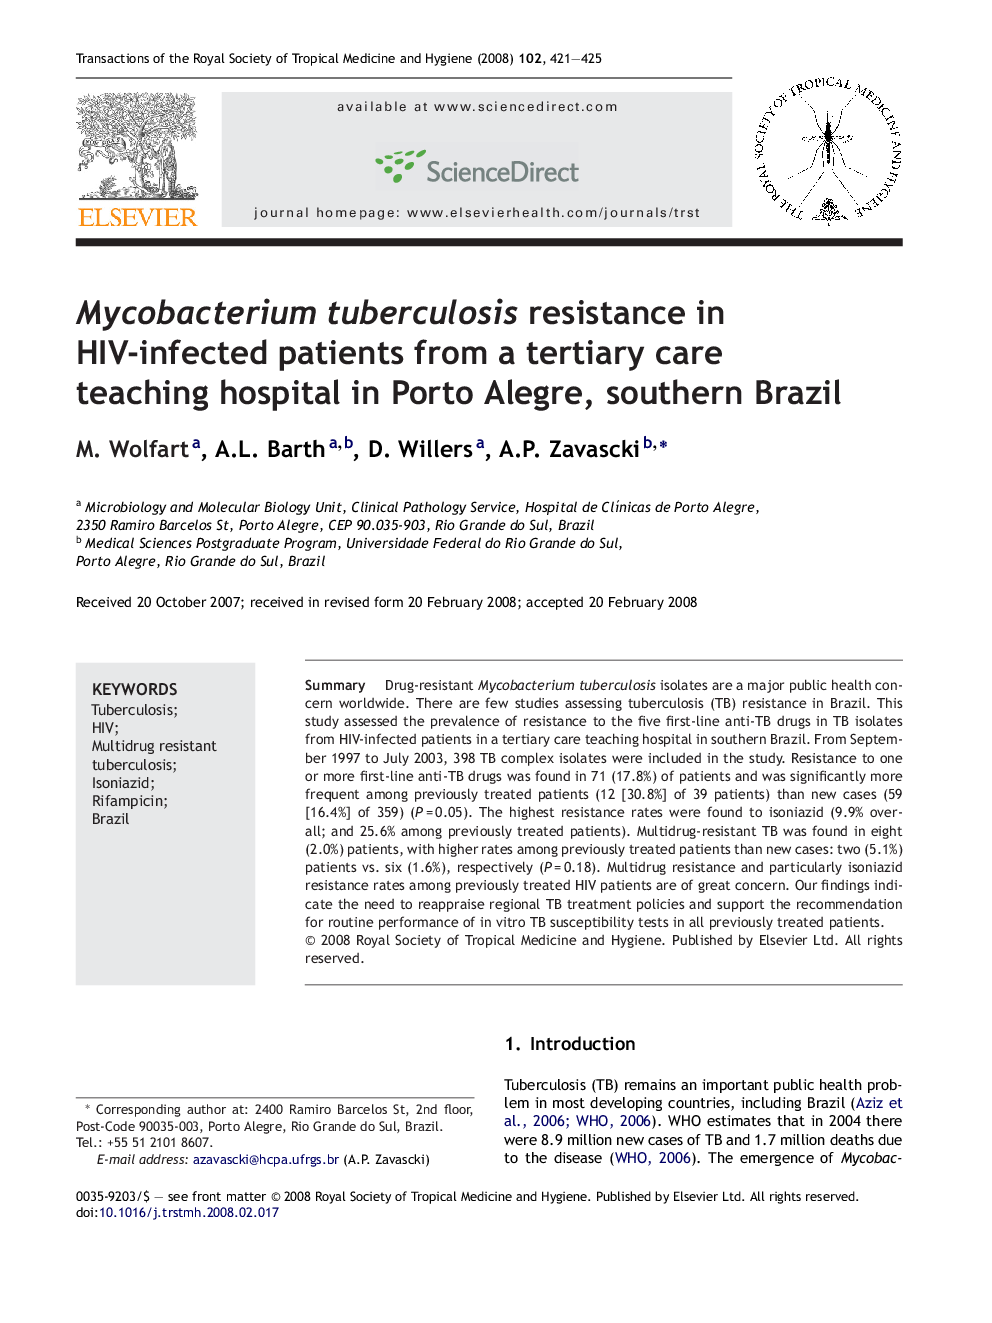 Mycobacterium tuberculosis resistance in HIV-infected patients from a tertiary care teaching hospital in Porto Alegre, southern Brazil